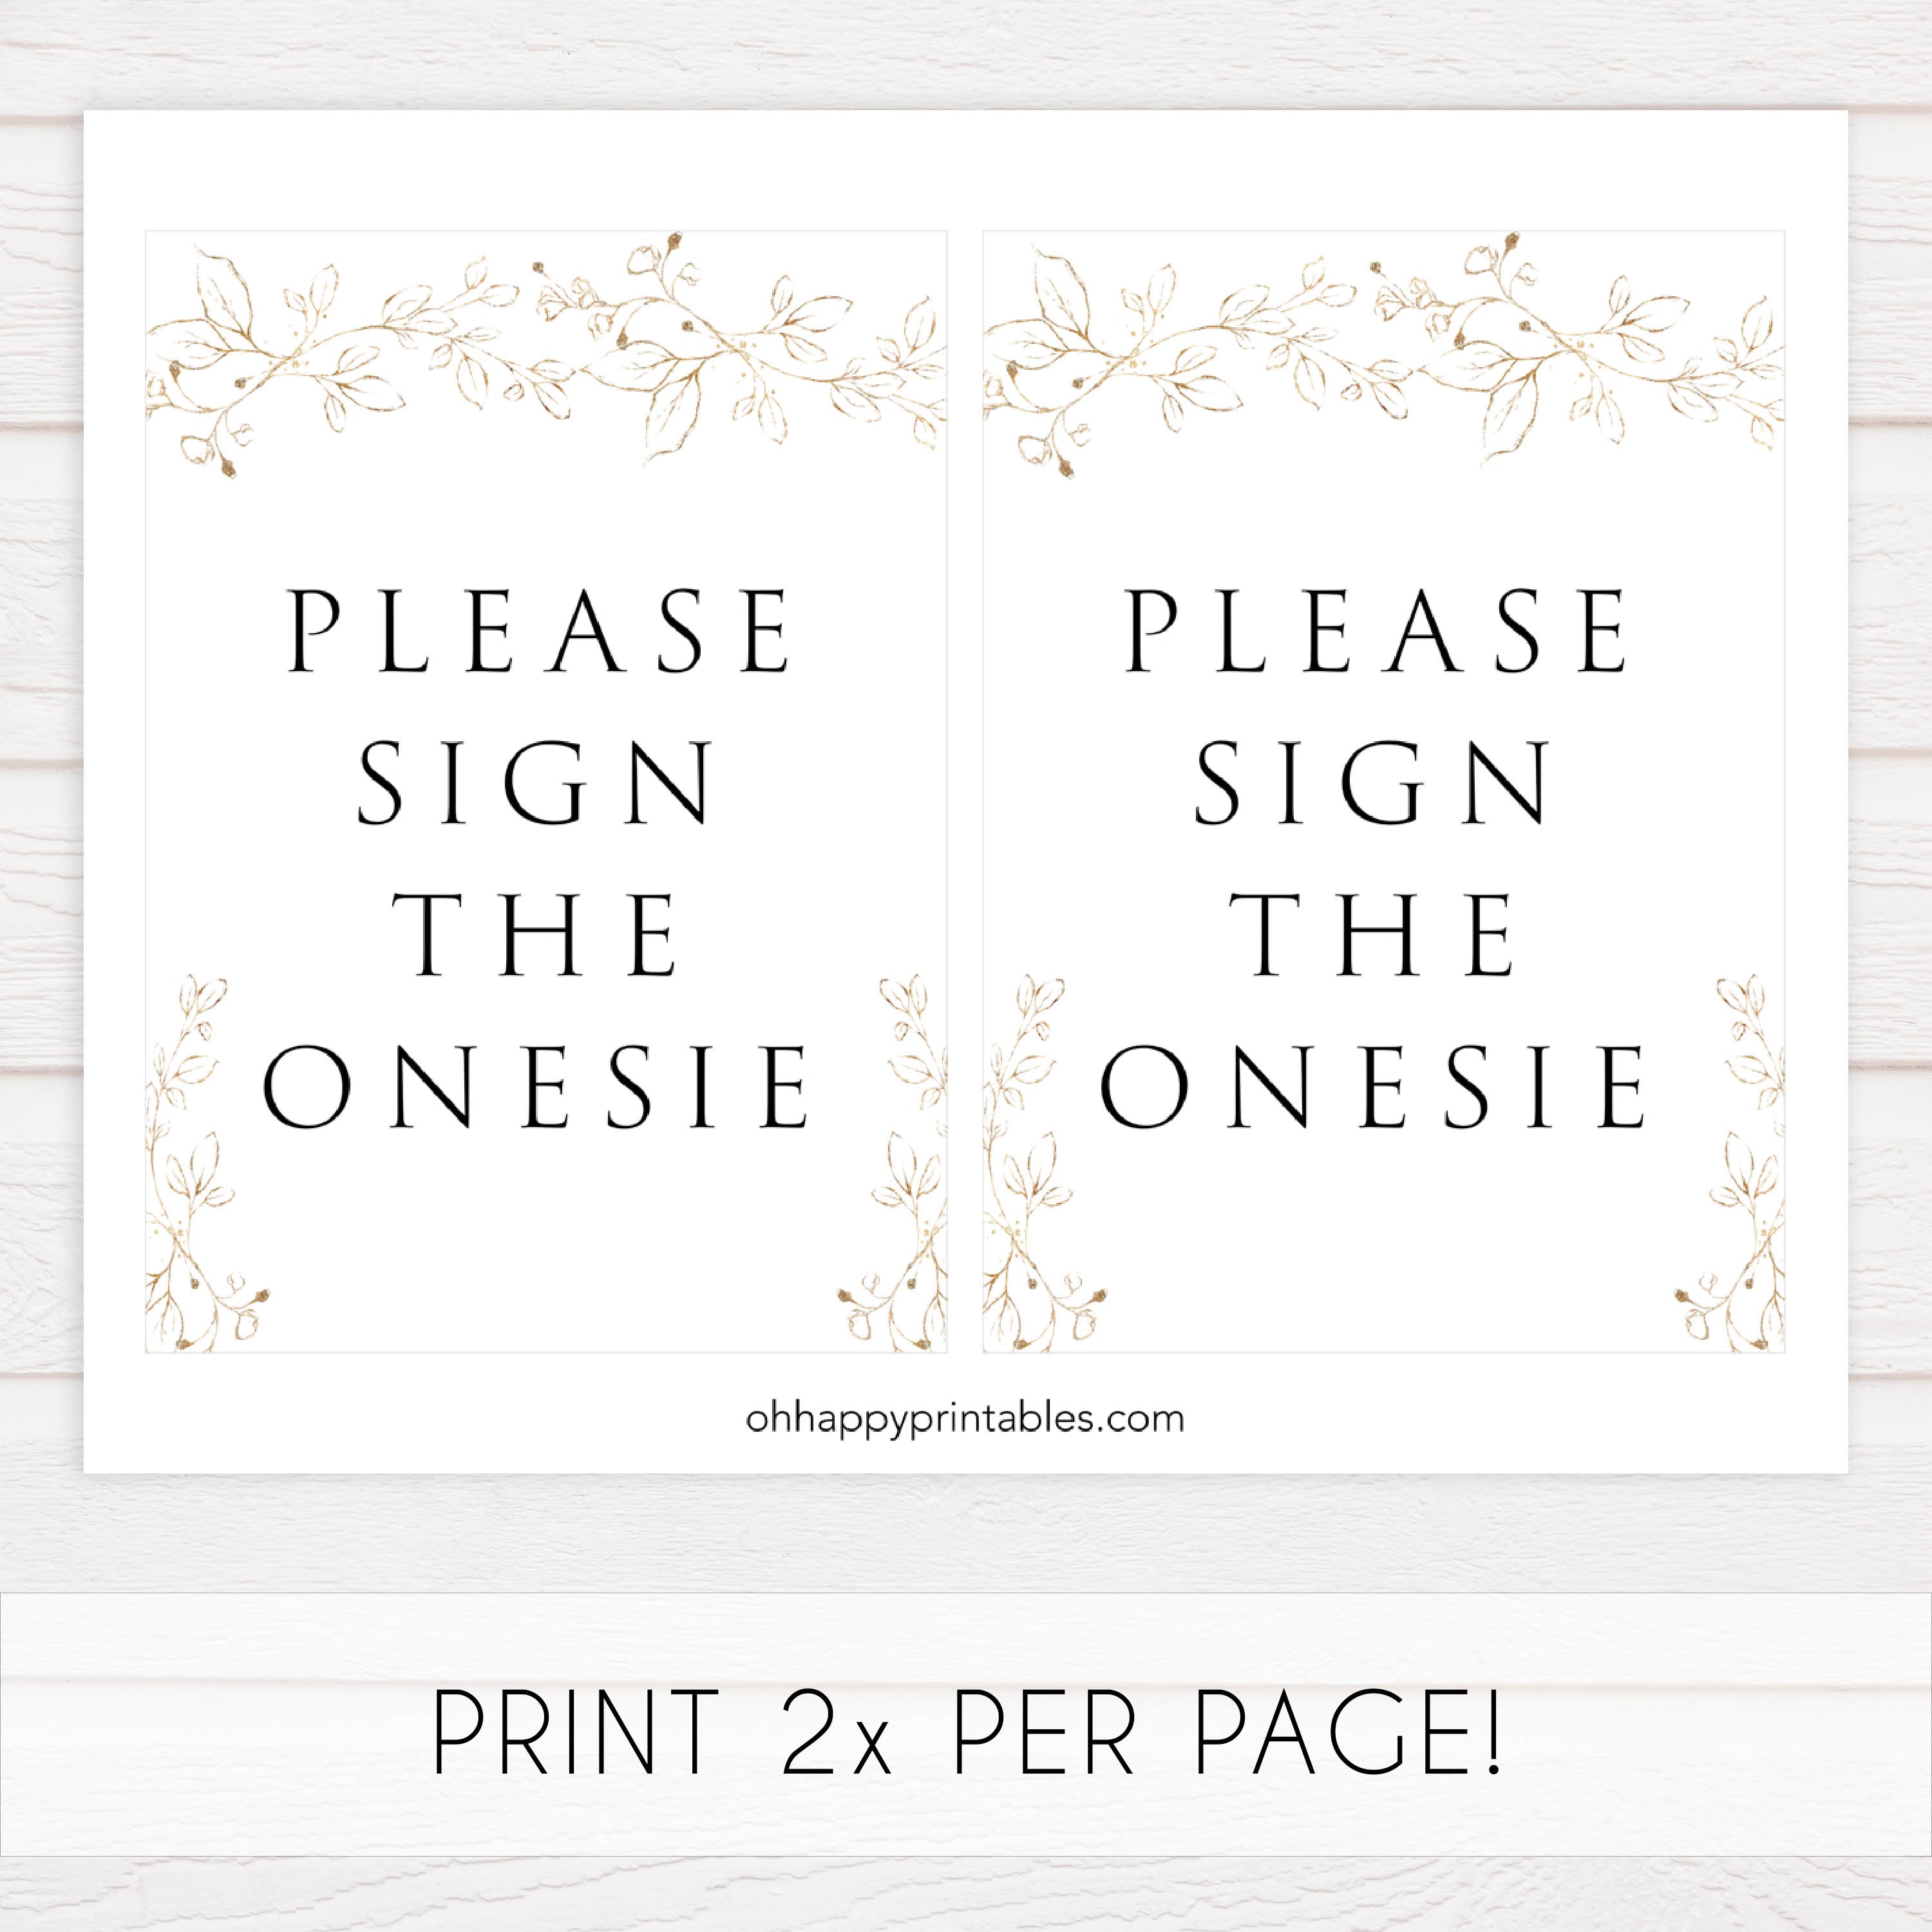 please sign the onesie baby game, Printable baby shower games, gold leaf baby games, baby shower games, fun baby shower ideas, top baby shower ideas, gold leaf baby shower, baby shower games, fun gold leaf baby shower ideas